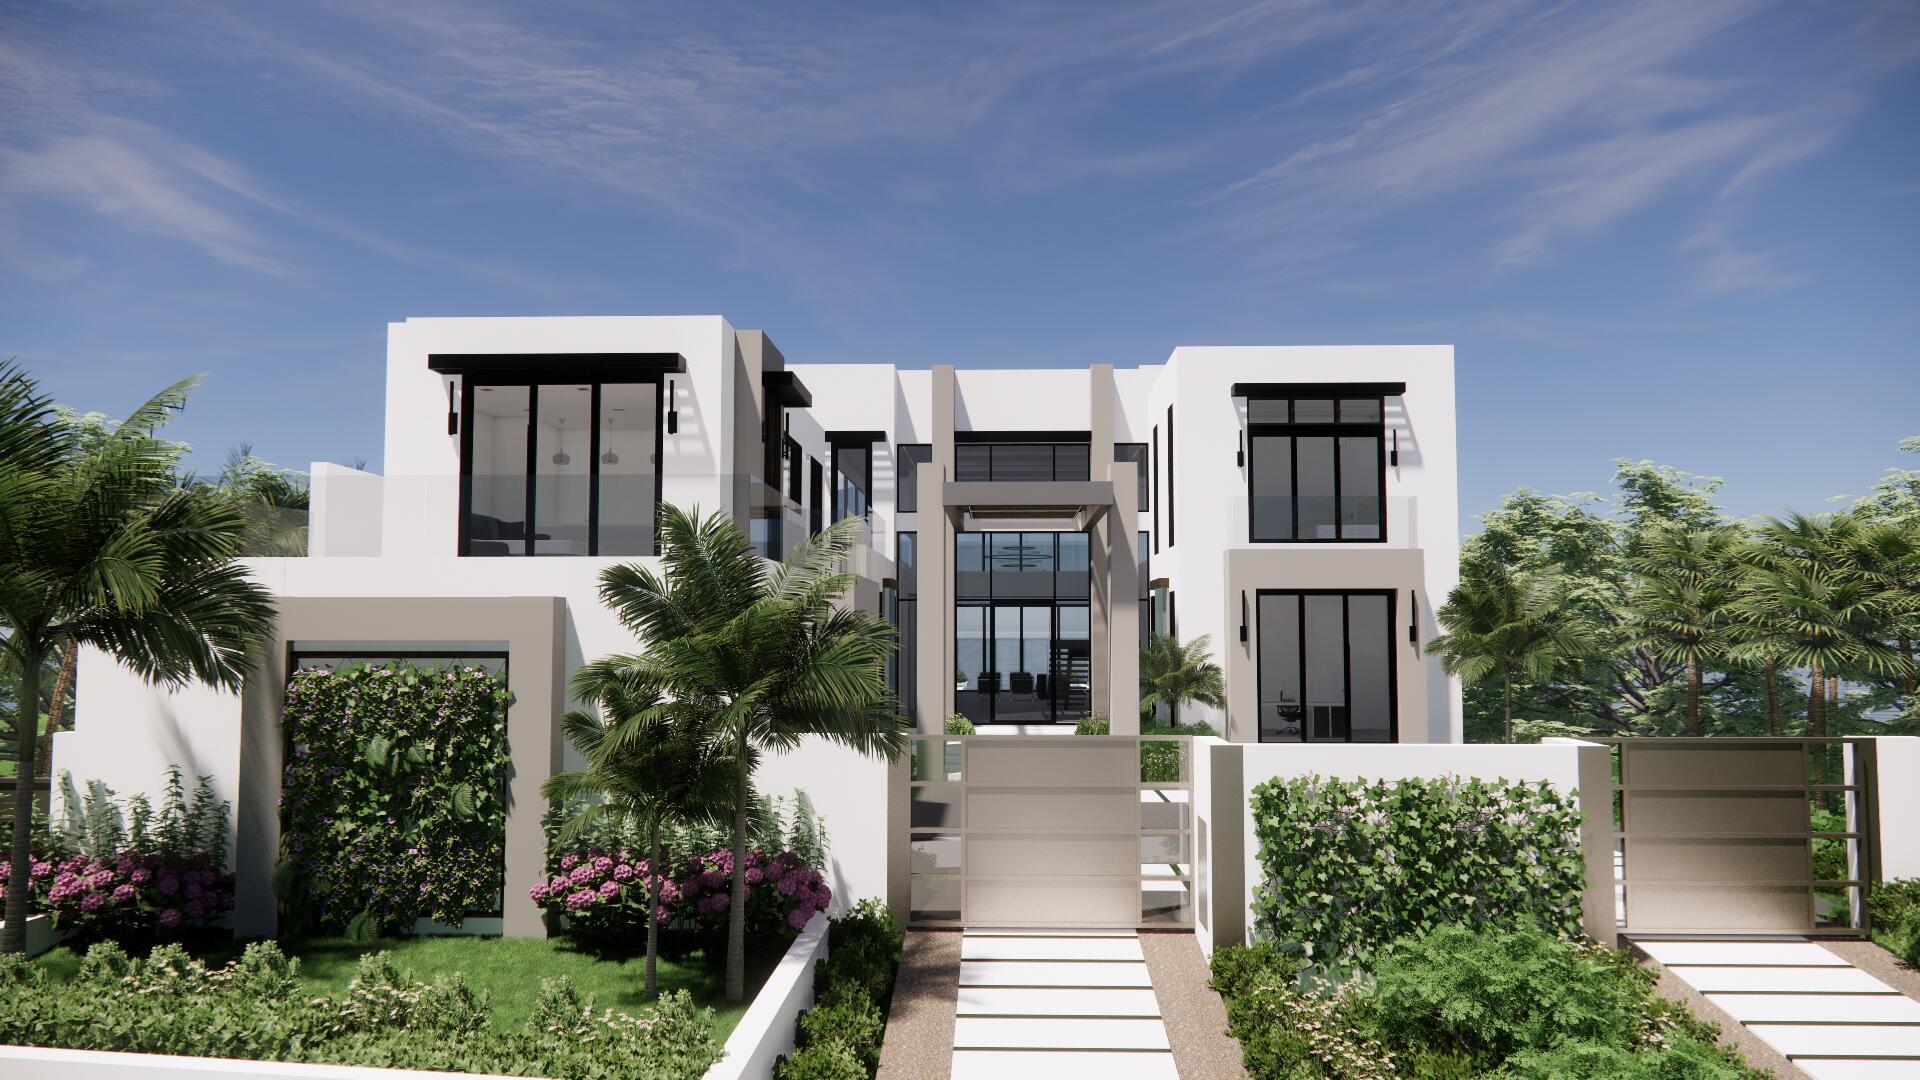 This Fabulous New Modern direct intracoastal waterfront home in West Palm Beach sits on a large 20,000 square feet lot. Spectacular design by architect David Lawrence with 12,730 total sq ft under roof, built at 10' above sea level, with 7 bedrooms, 8 full baths, 1 half bath, a 40' pool, a waterfront spa/hot tub, roof top decks, boat dock/lift, and a generator. Landscape designed by John Lang and being built by Tri General Contractors. Completion early spring of 24.